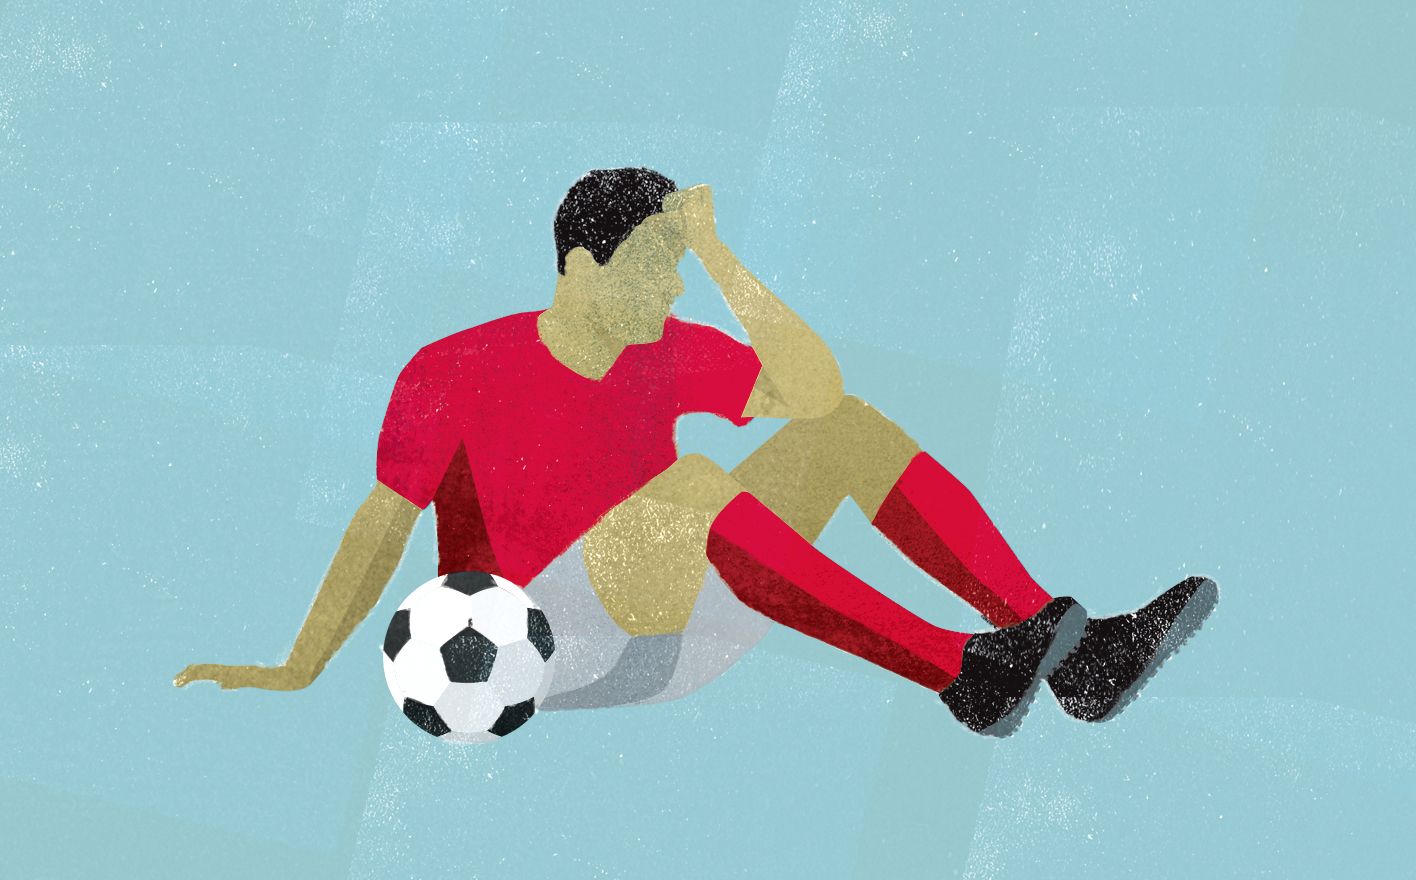 Illustration of soccer player with head injury